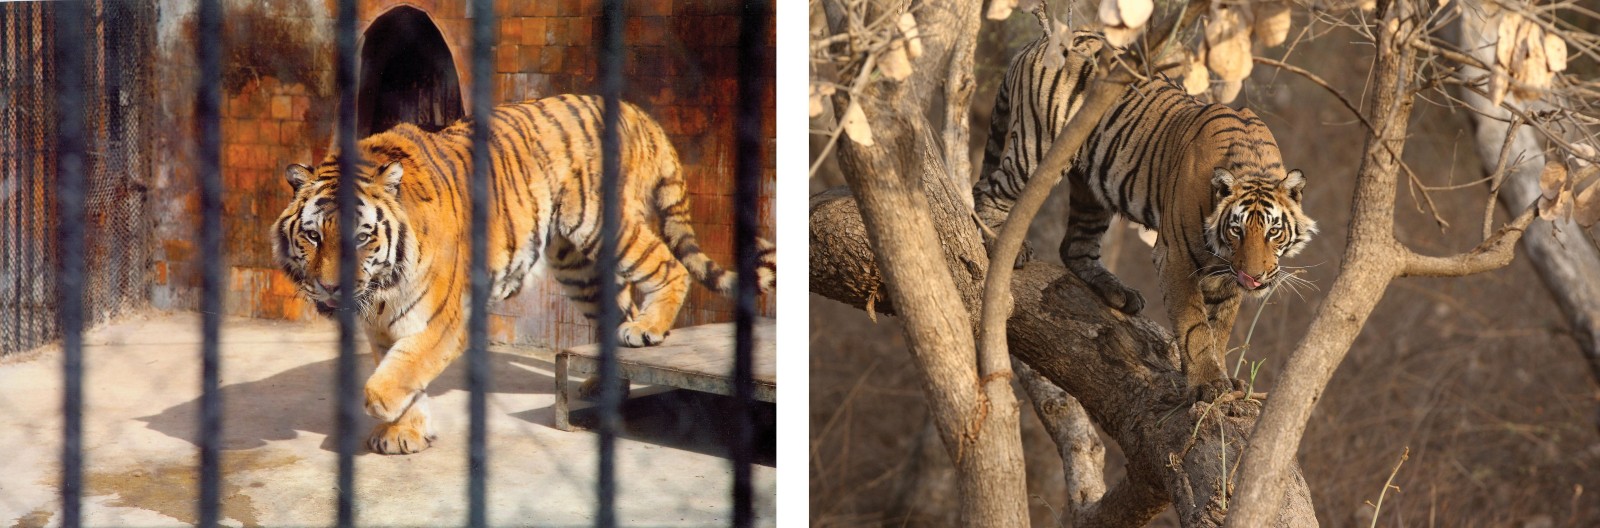 Two photographs of tigers side by side. On the left, a tiger is shown in a cage and on the right, the tiger is in the wild in a forest setting.